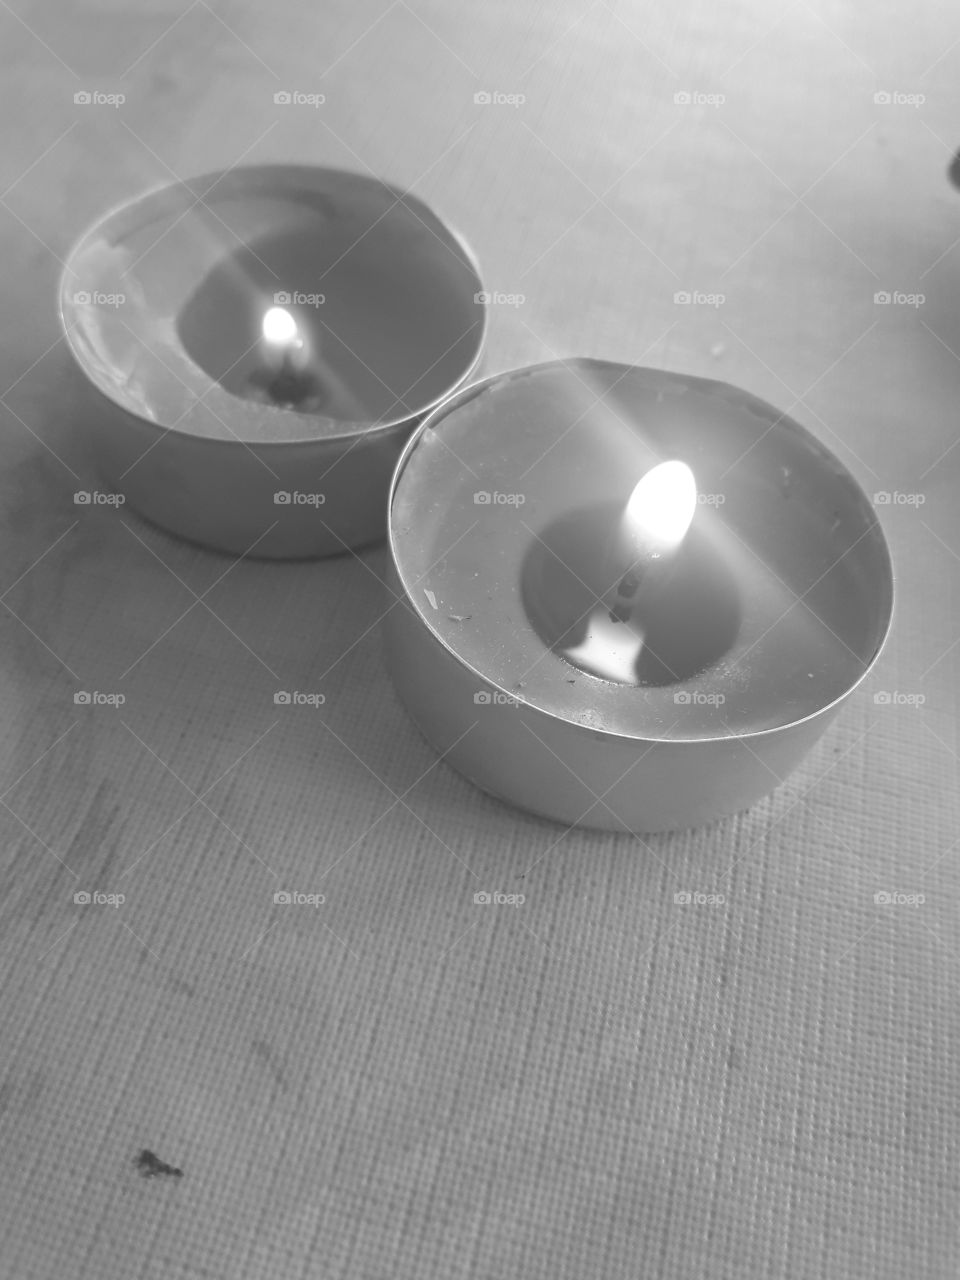 blac k and white picture  candle flame